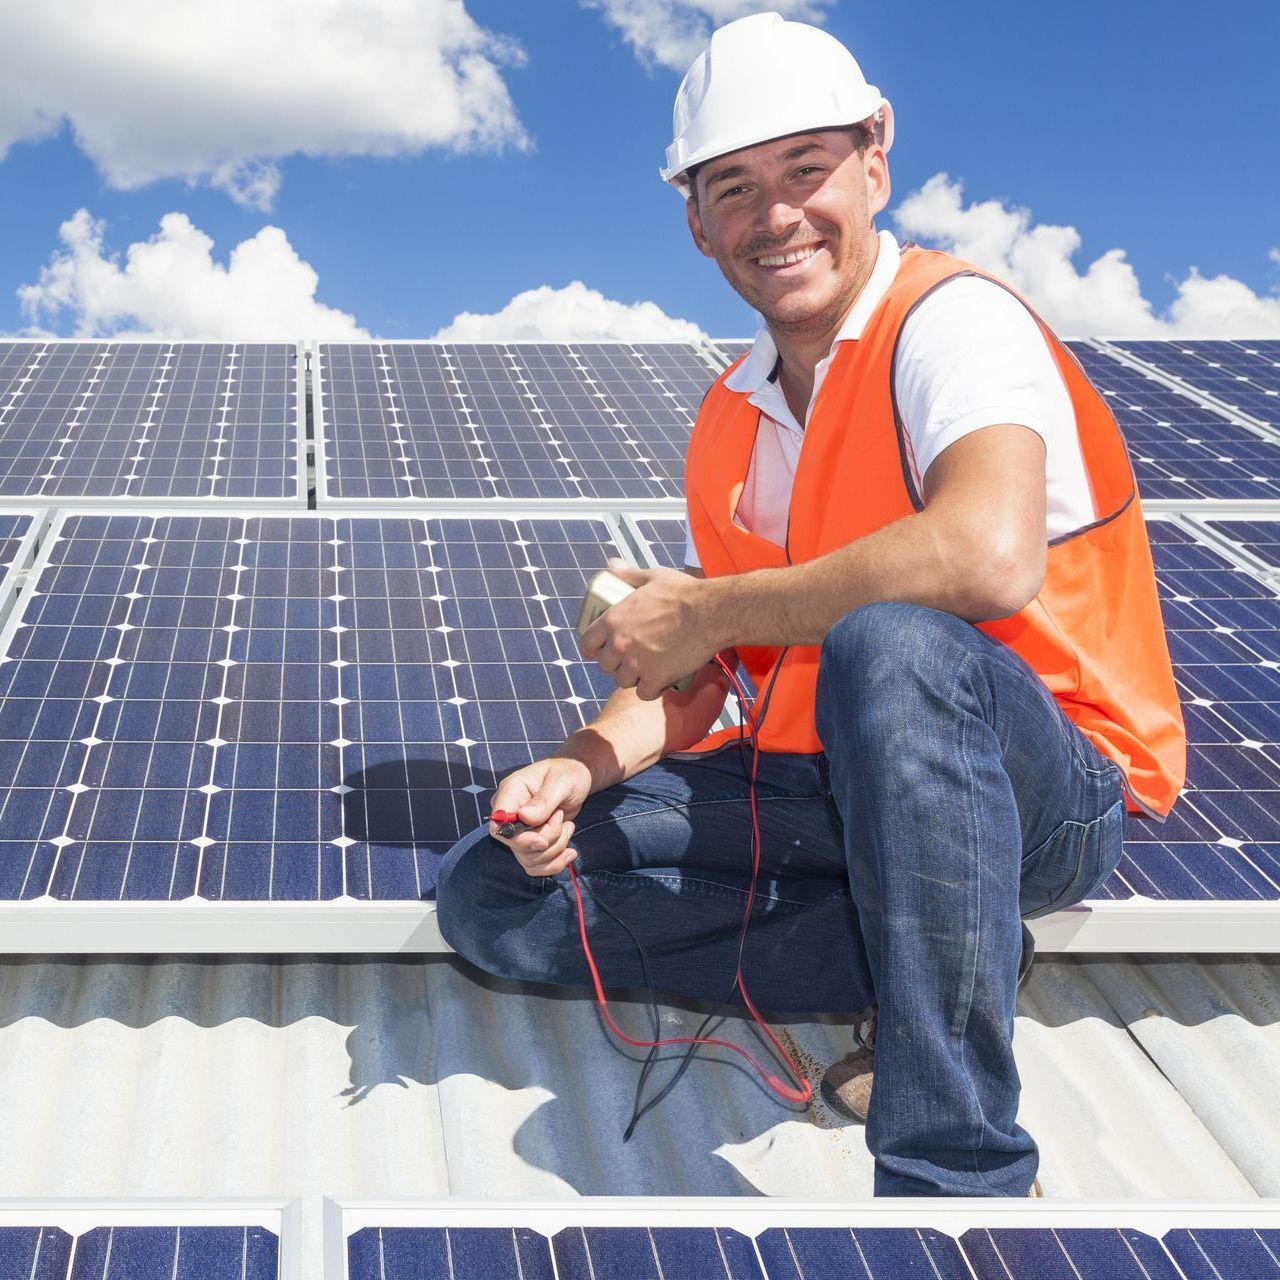 a man in an orange vest is kneeling on a roof with solar panels in the background